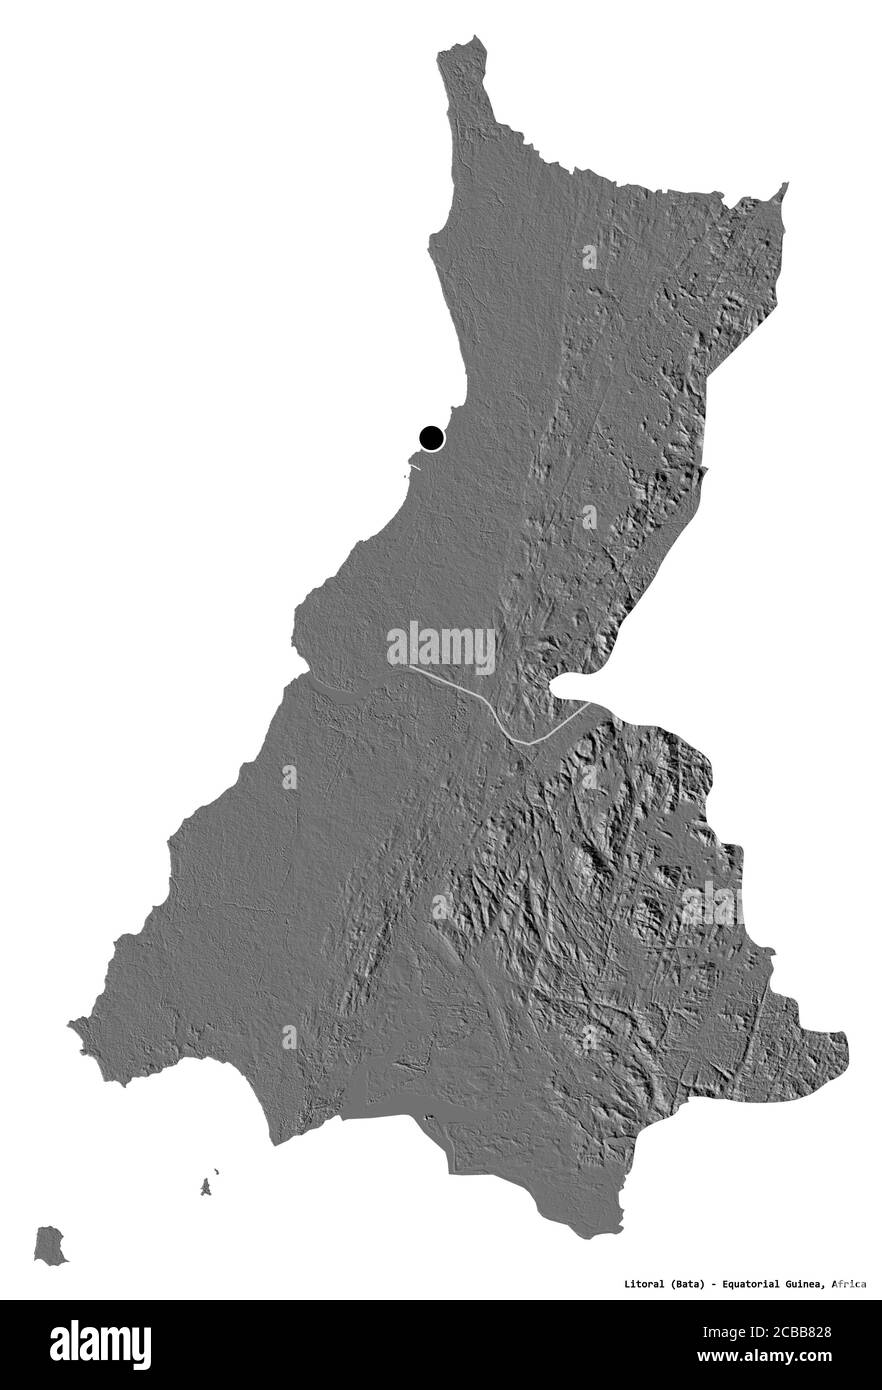 Shape of Litoral, province of Equatorial Guinea, with its capital isolated on white background. Bilevel elevation map. 3D rendering Stock Photo